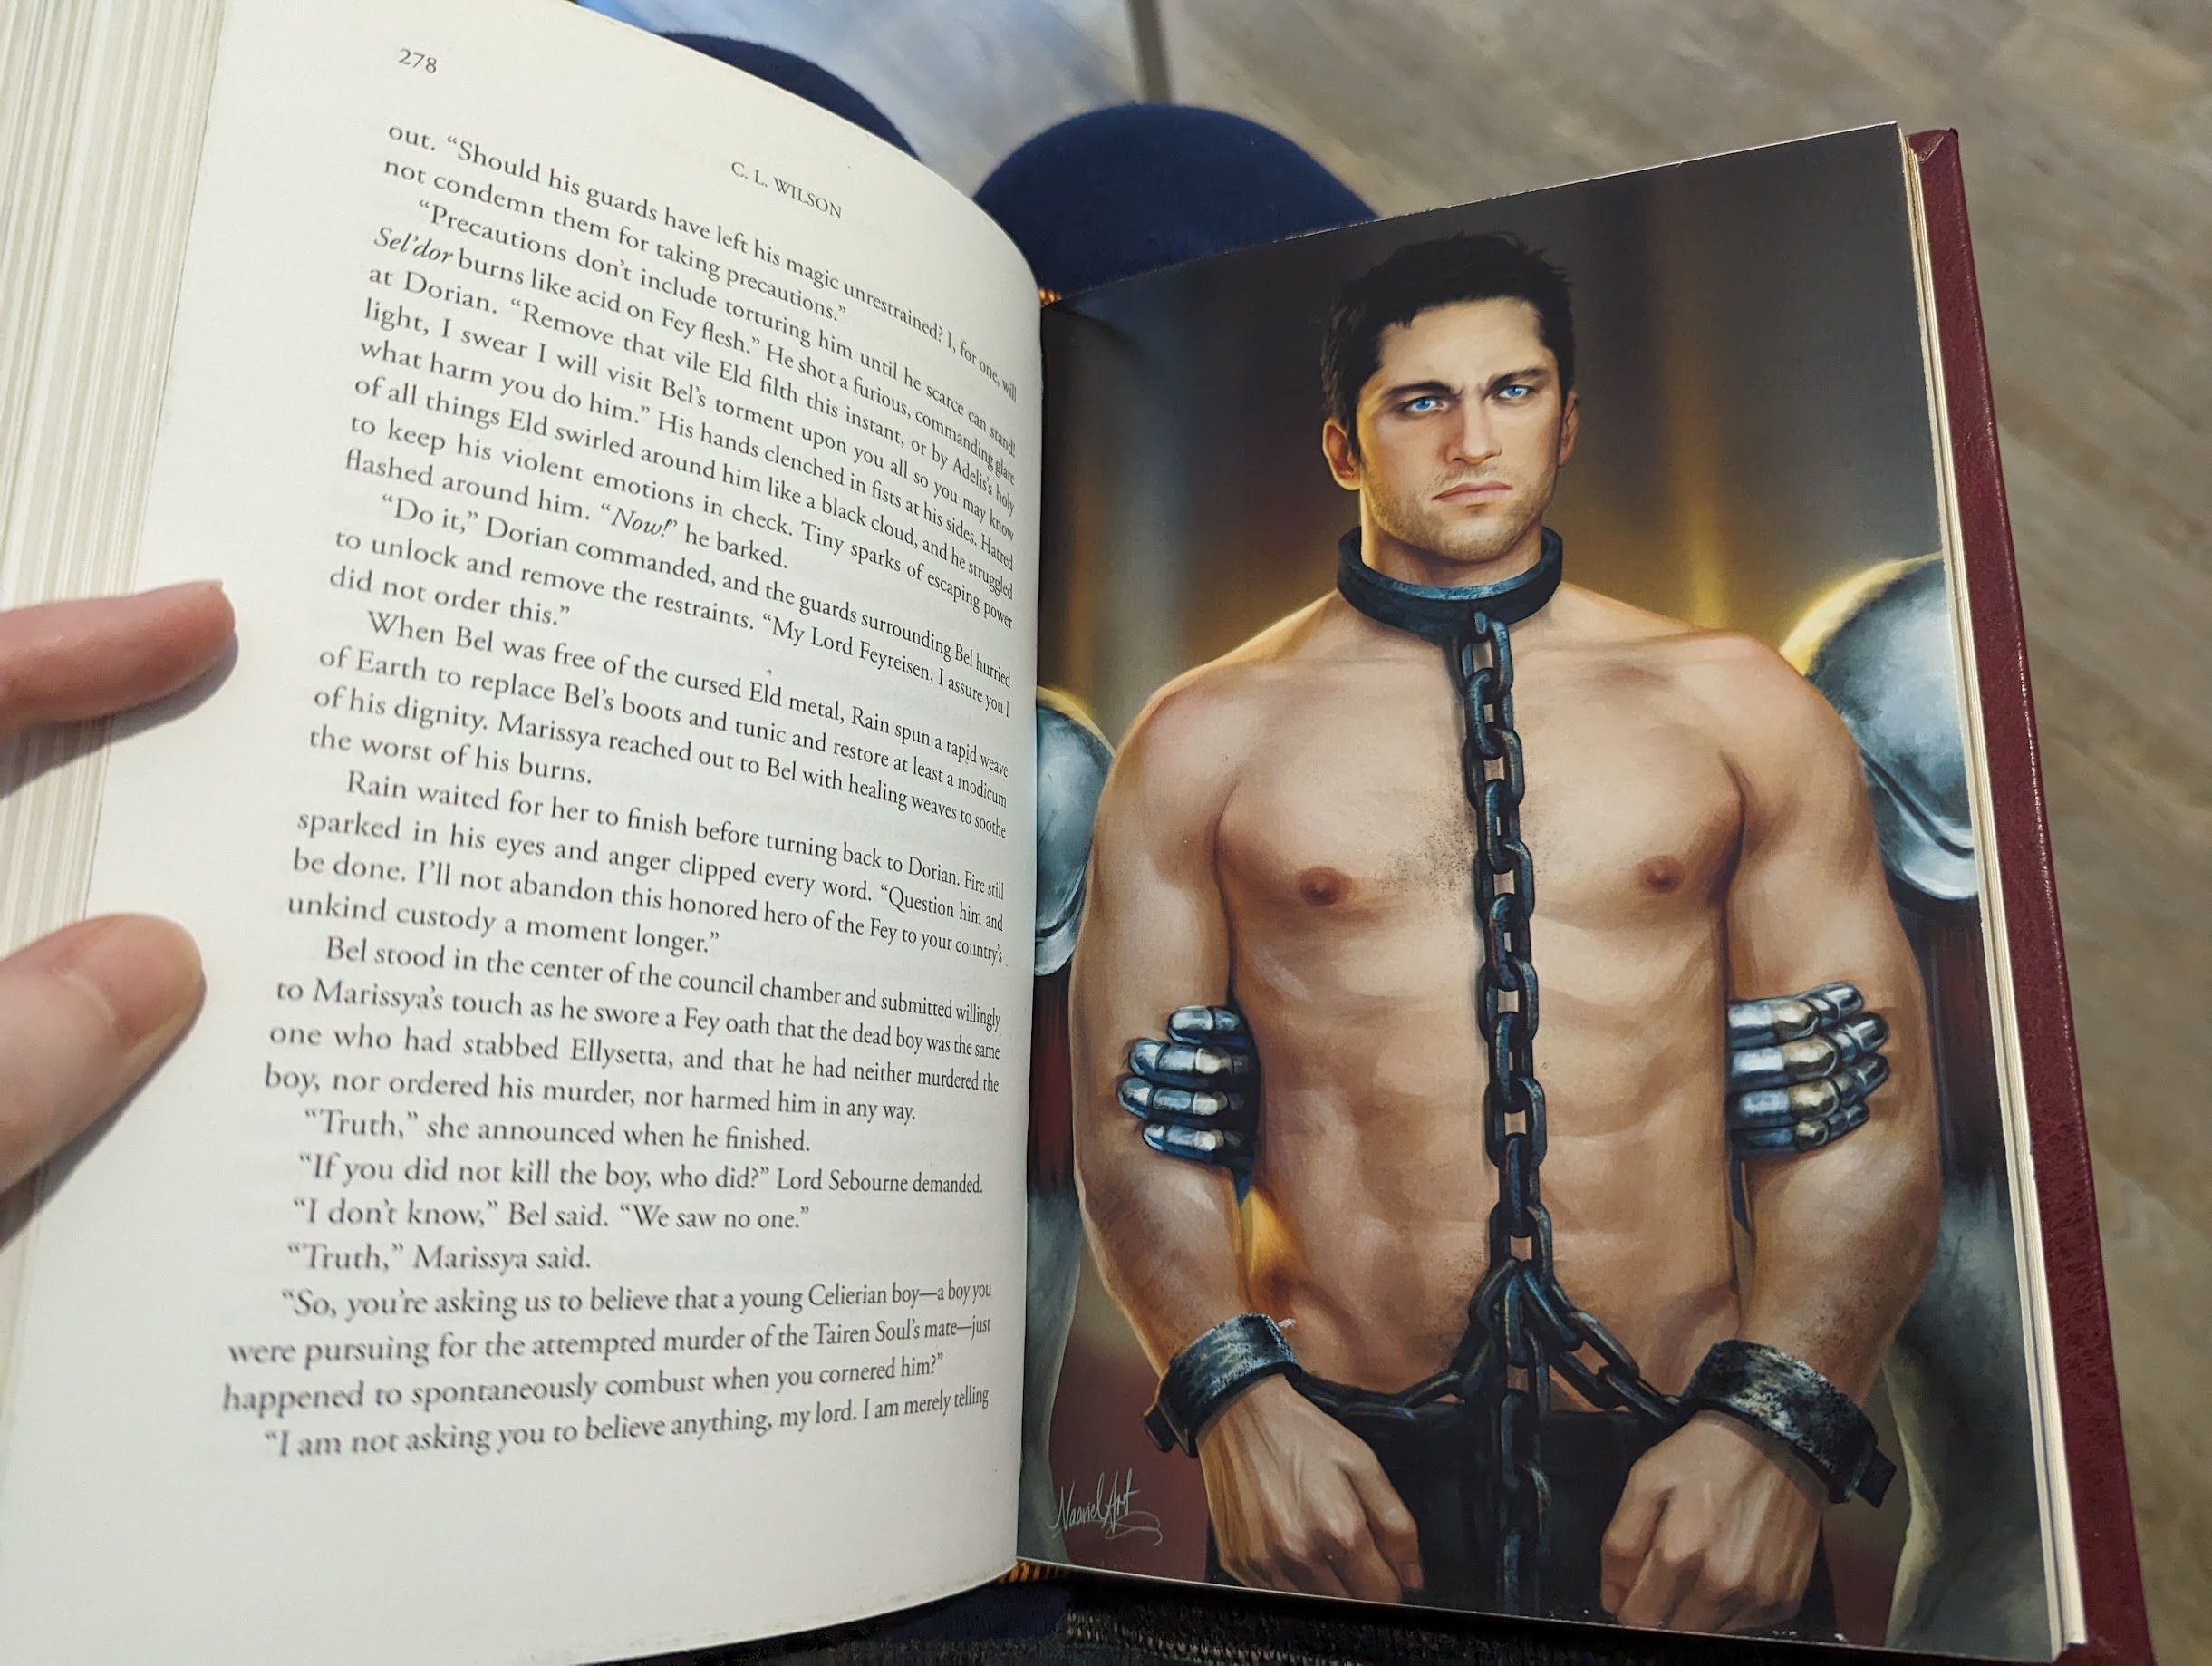 Photo of a full colour illustration inside a book. It features a muscular, shirtless man with a chain around his neck and shackles around his wrists.